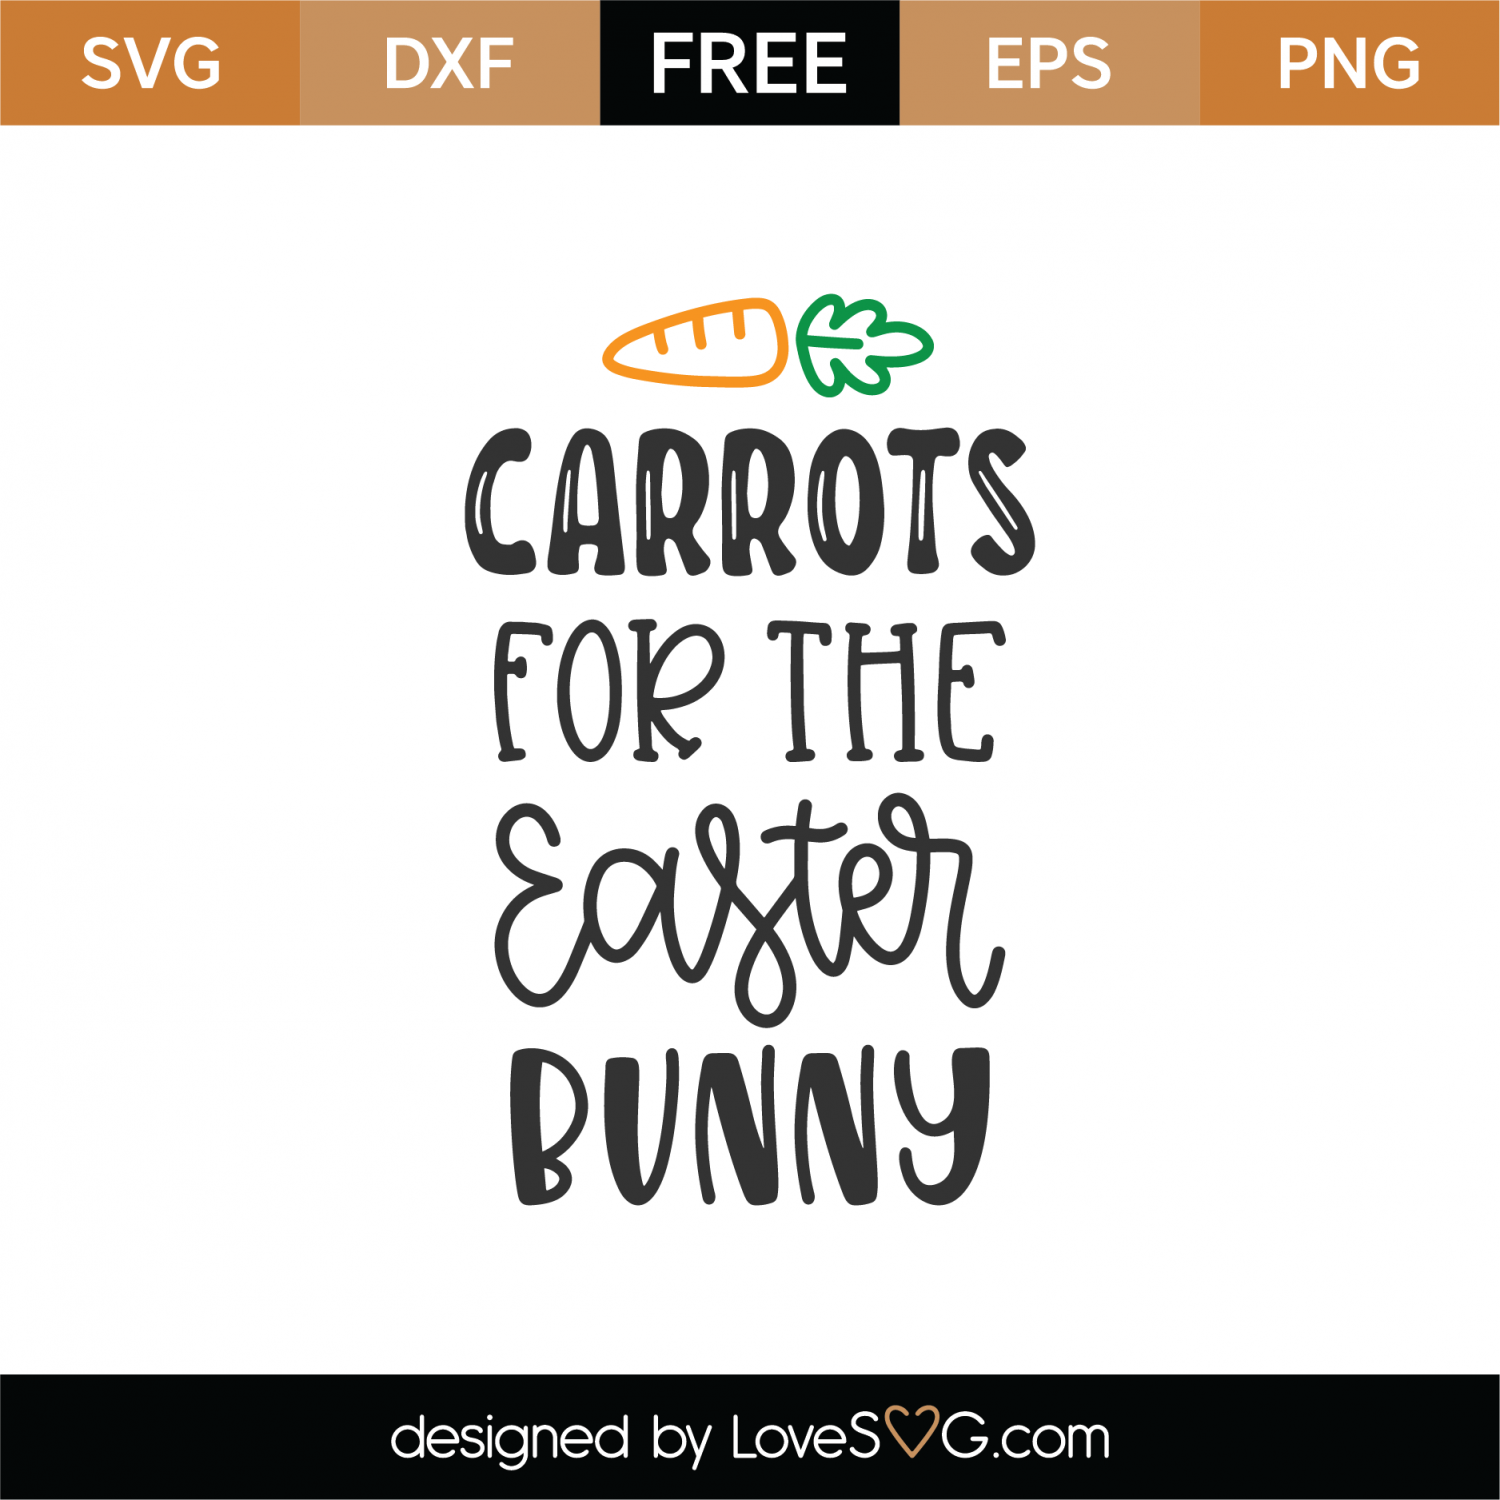 Download Free Carrots For The Easter Bunny SVG Cut File | Lovesvg.com